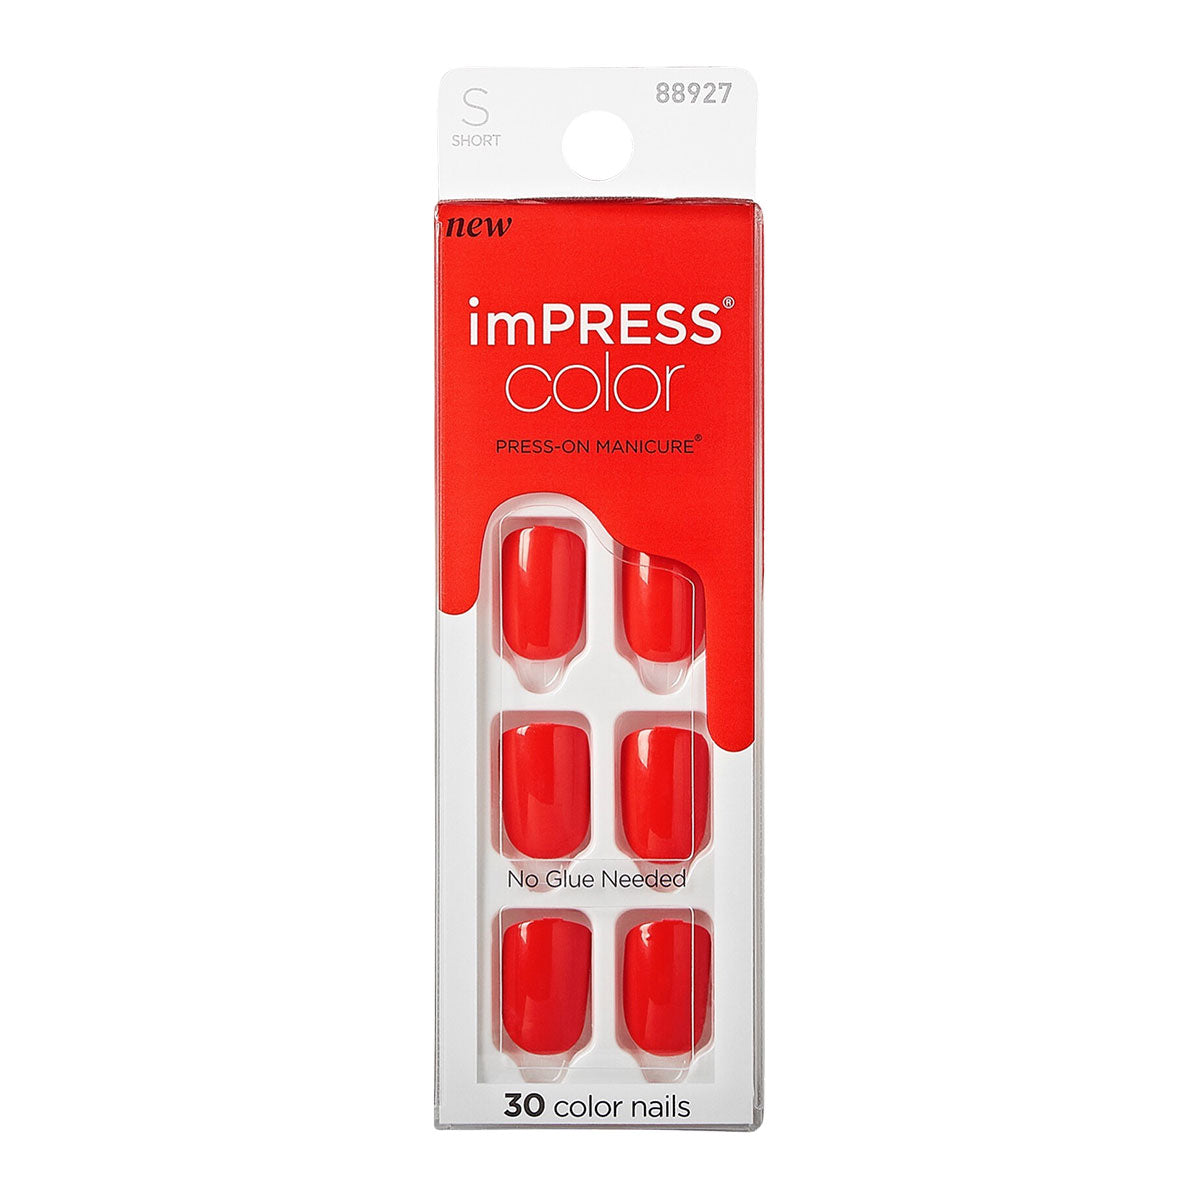 Kiss imPRESS Color Press-On Manicure | Succulent Red